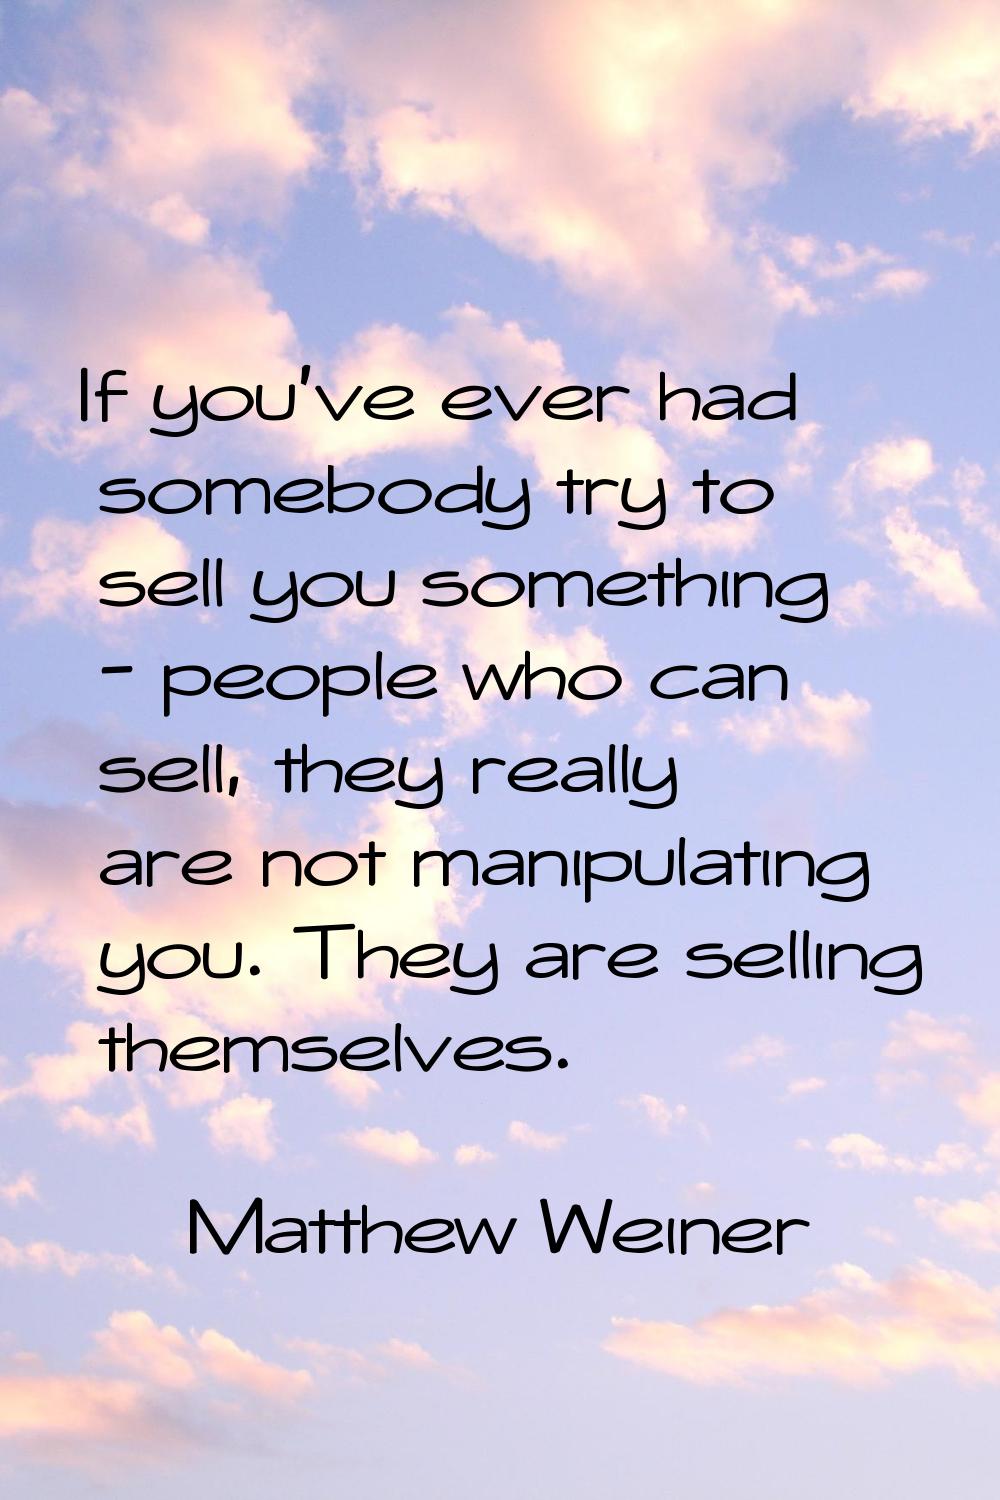 If you've ever had somebody try to sell you something - people who can sell, they really are not ma